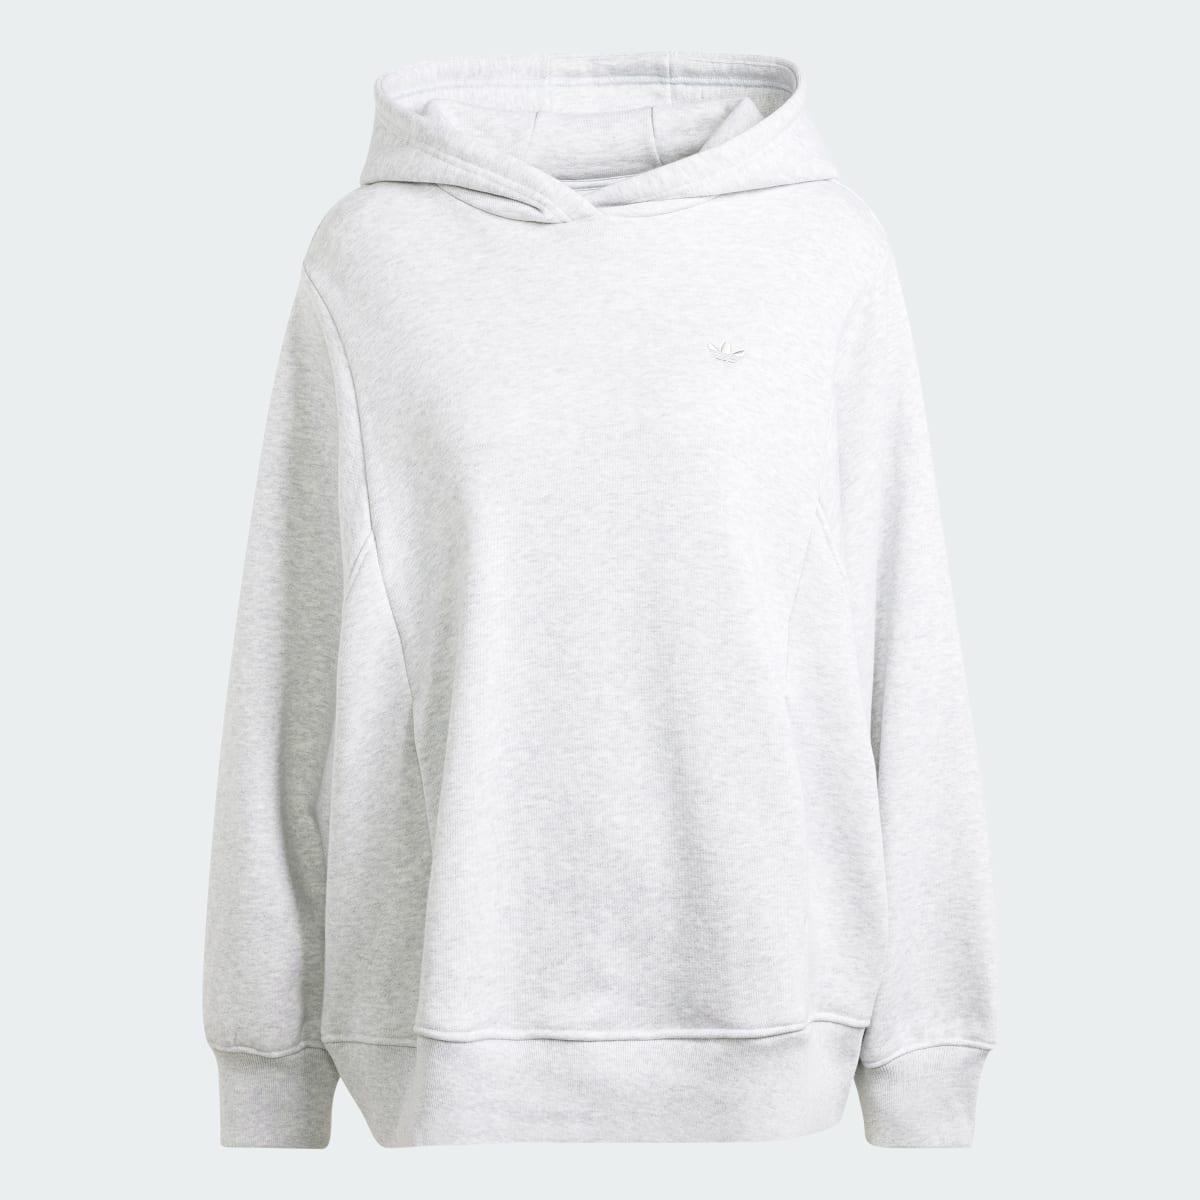 Adidas Premium Essentials Made To Be Remade Oversized Hoodie. 5